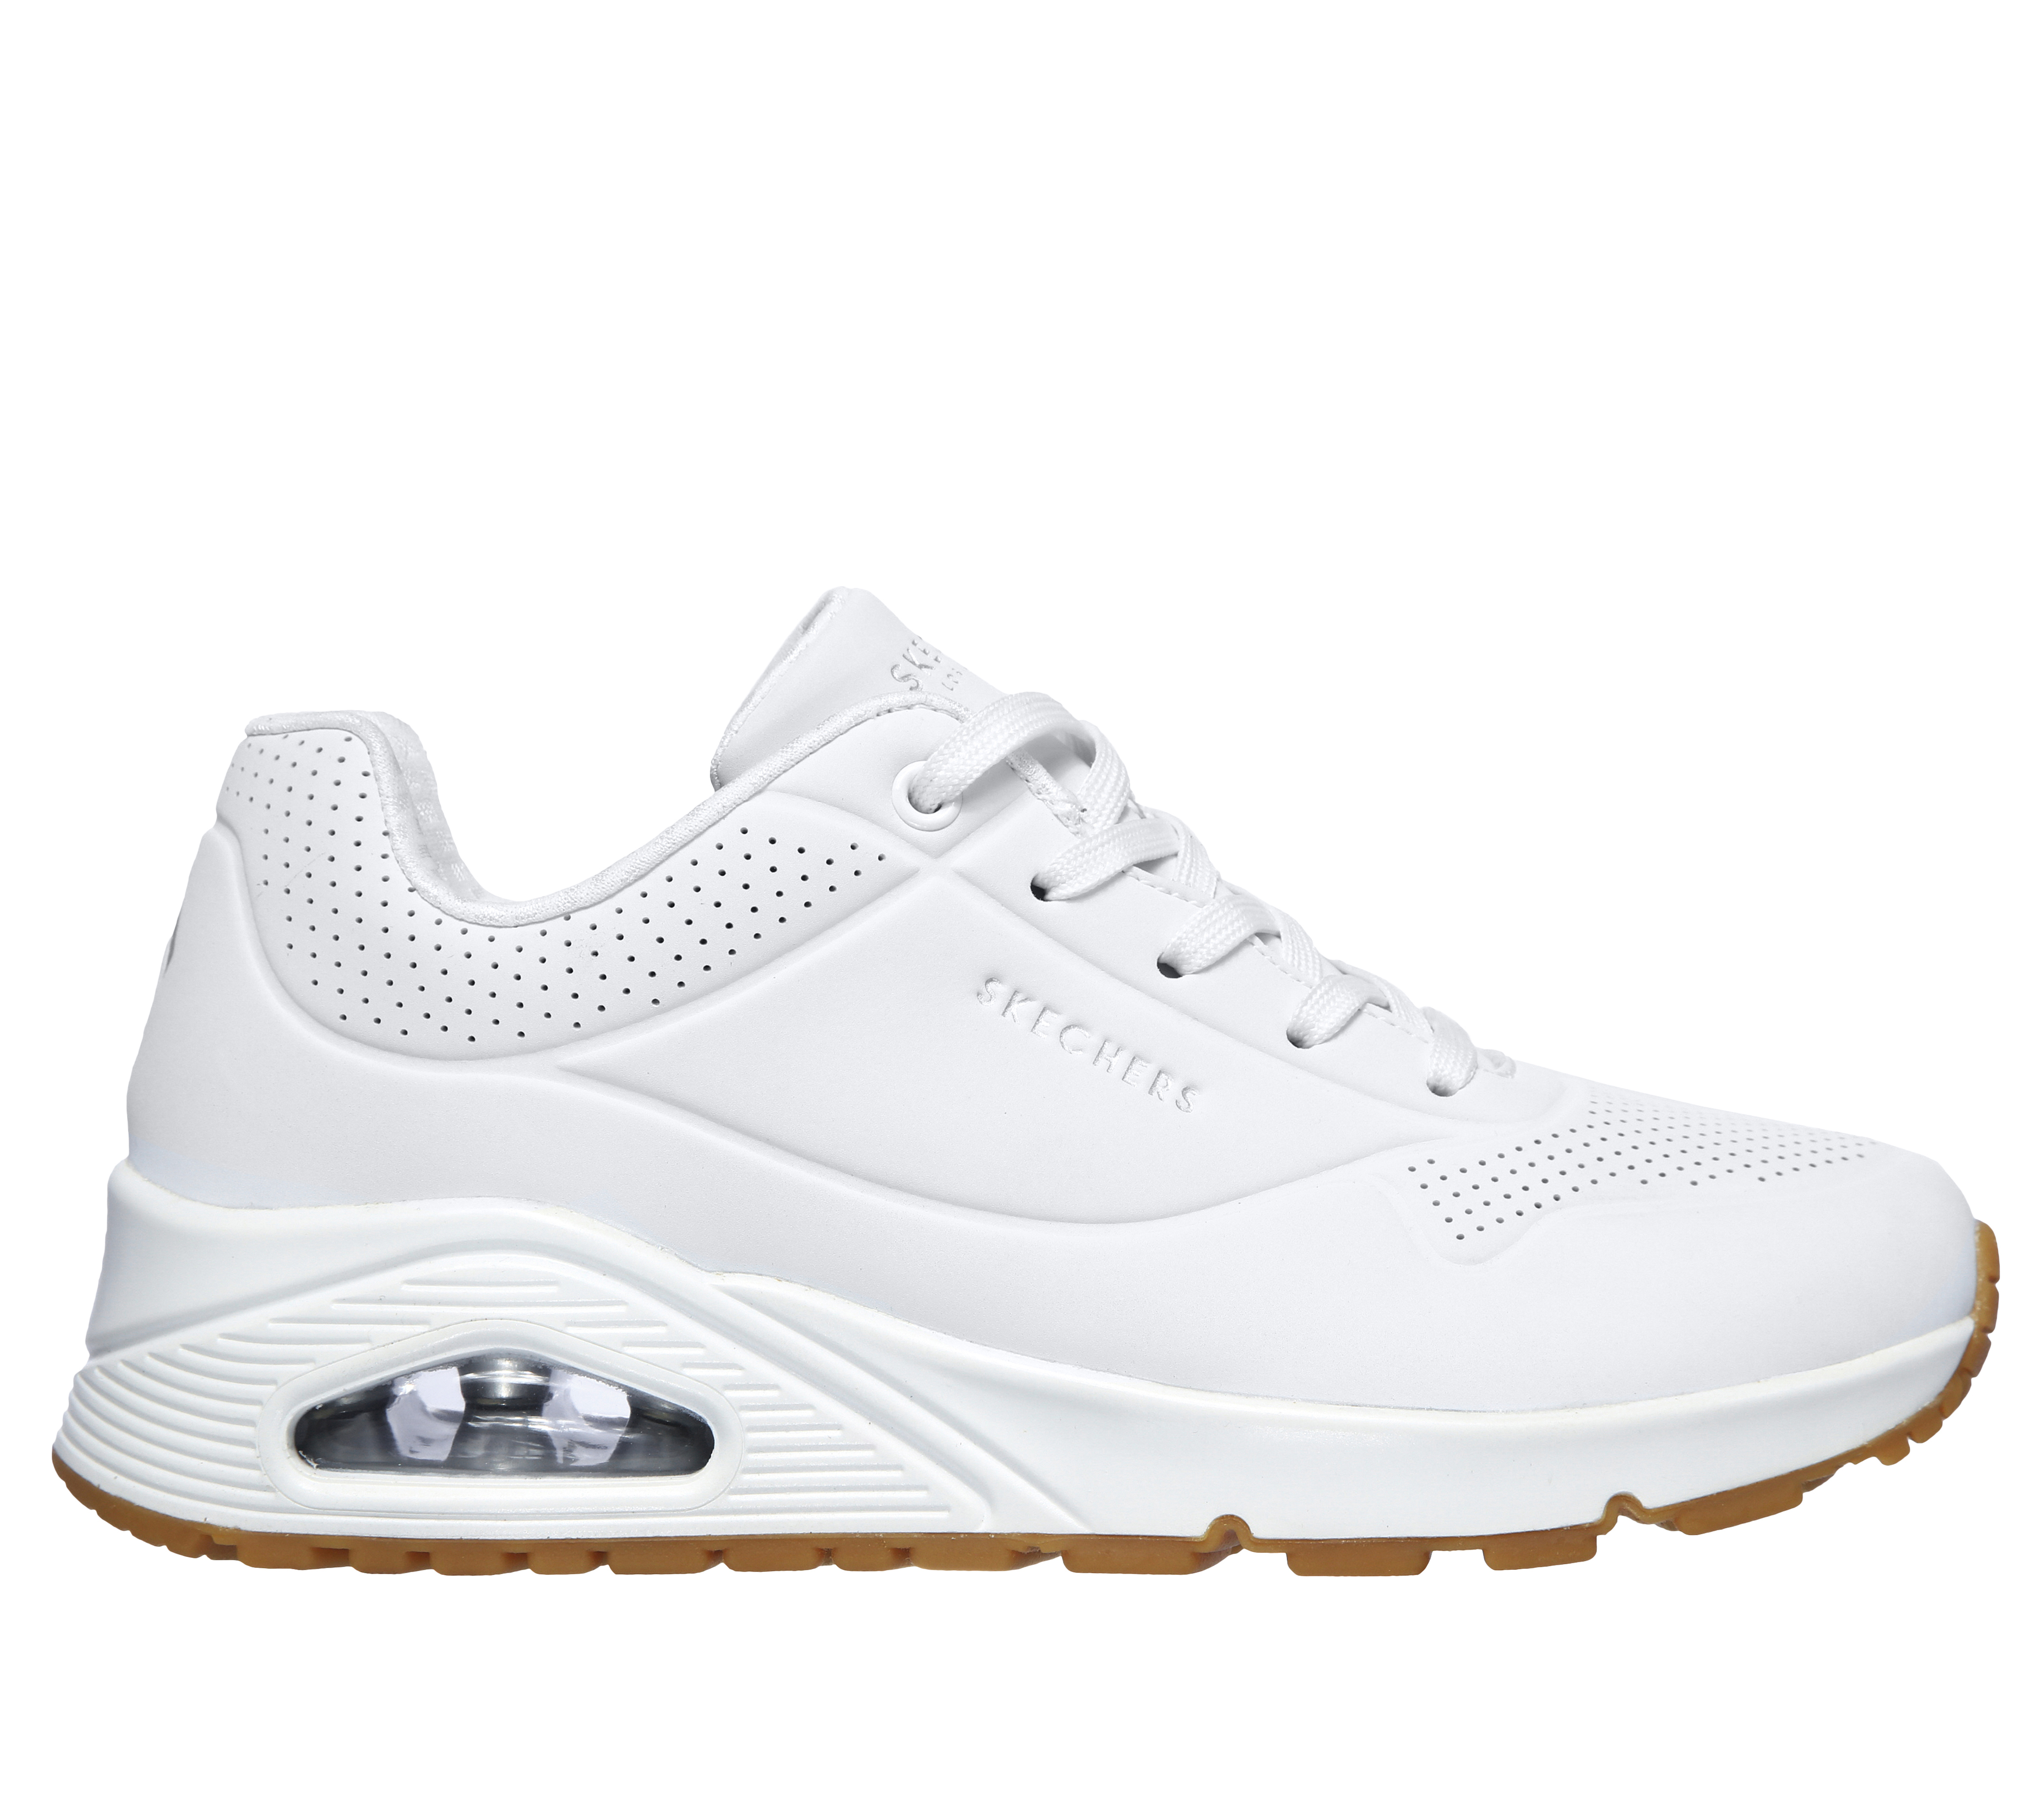 skechers all white leather shoes